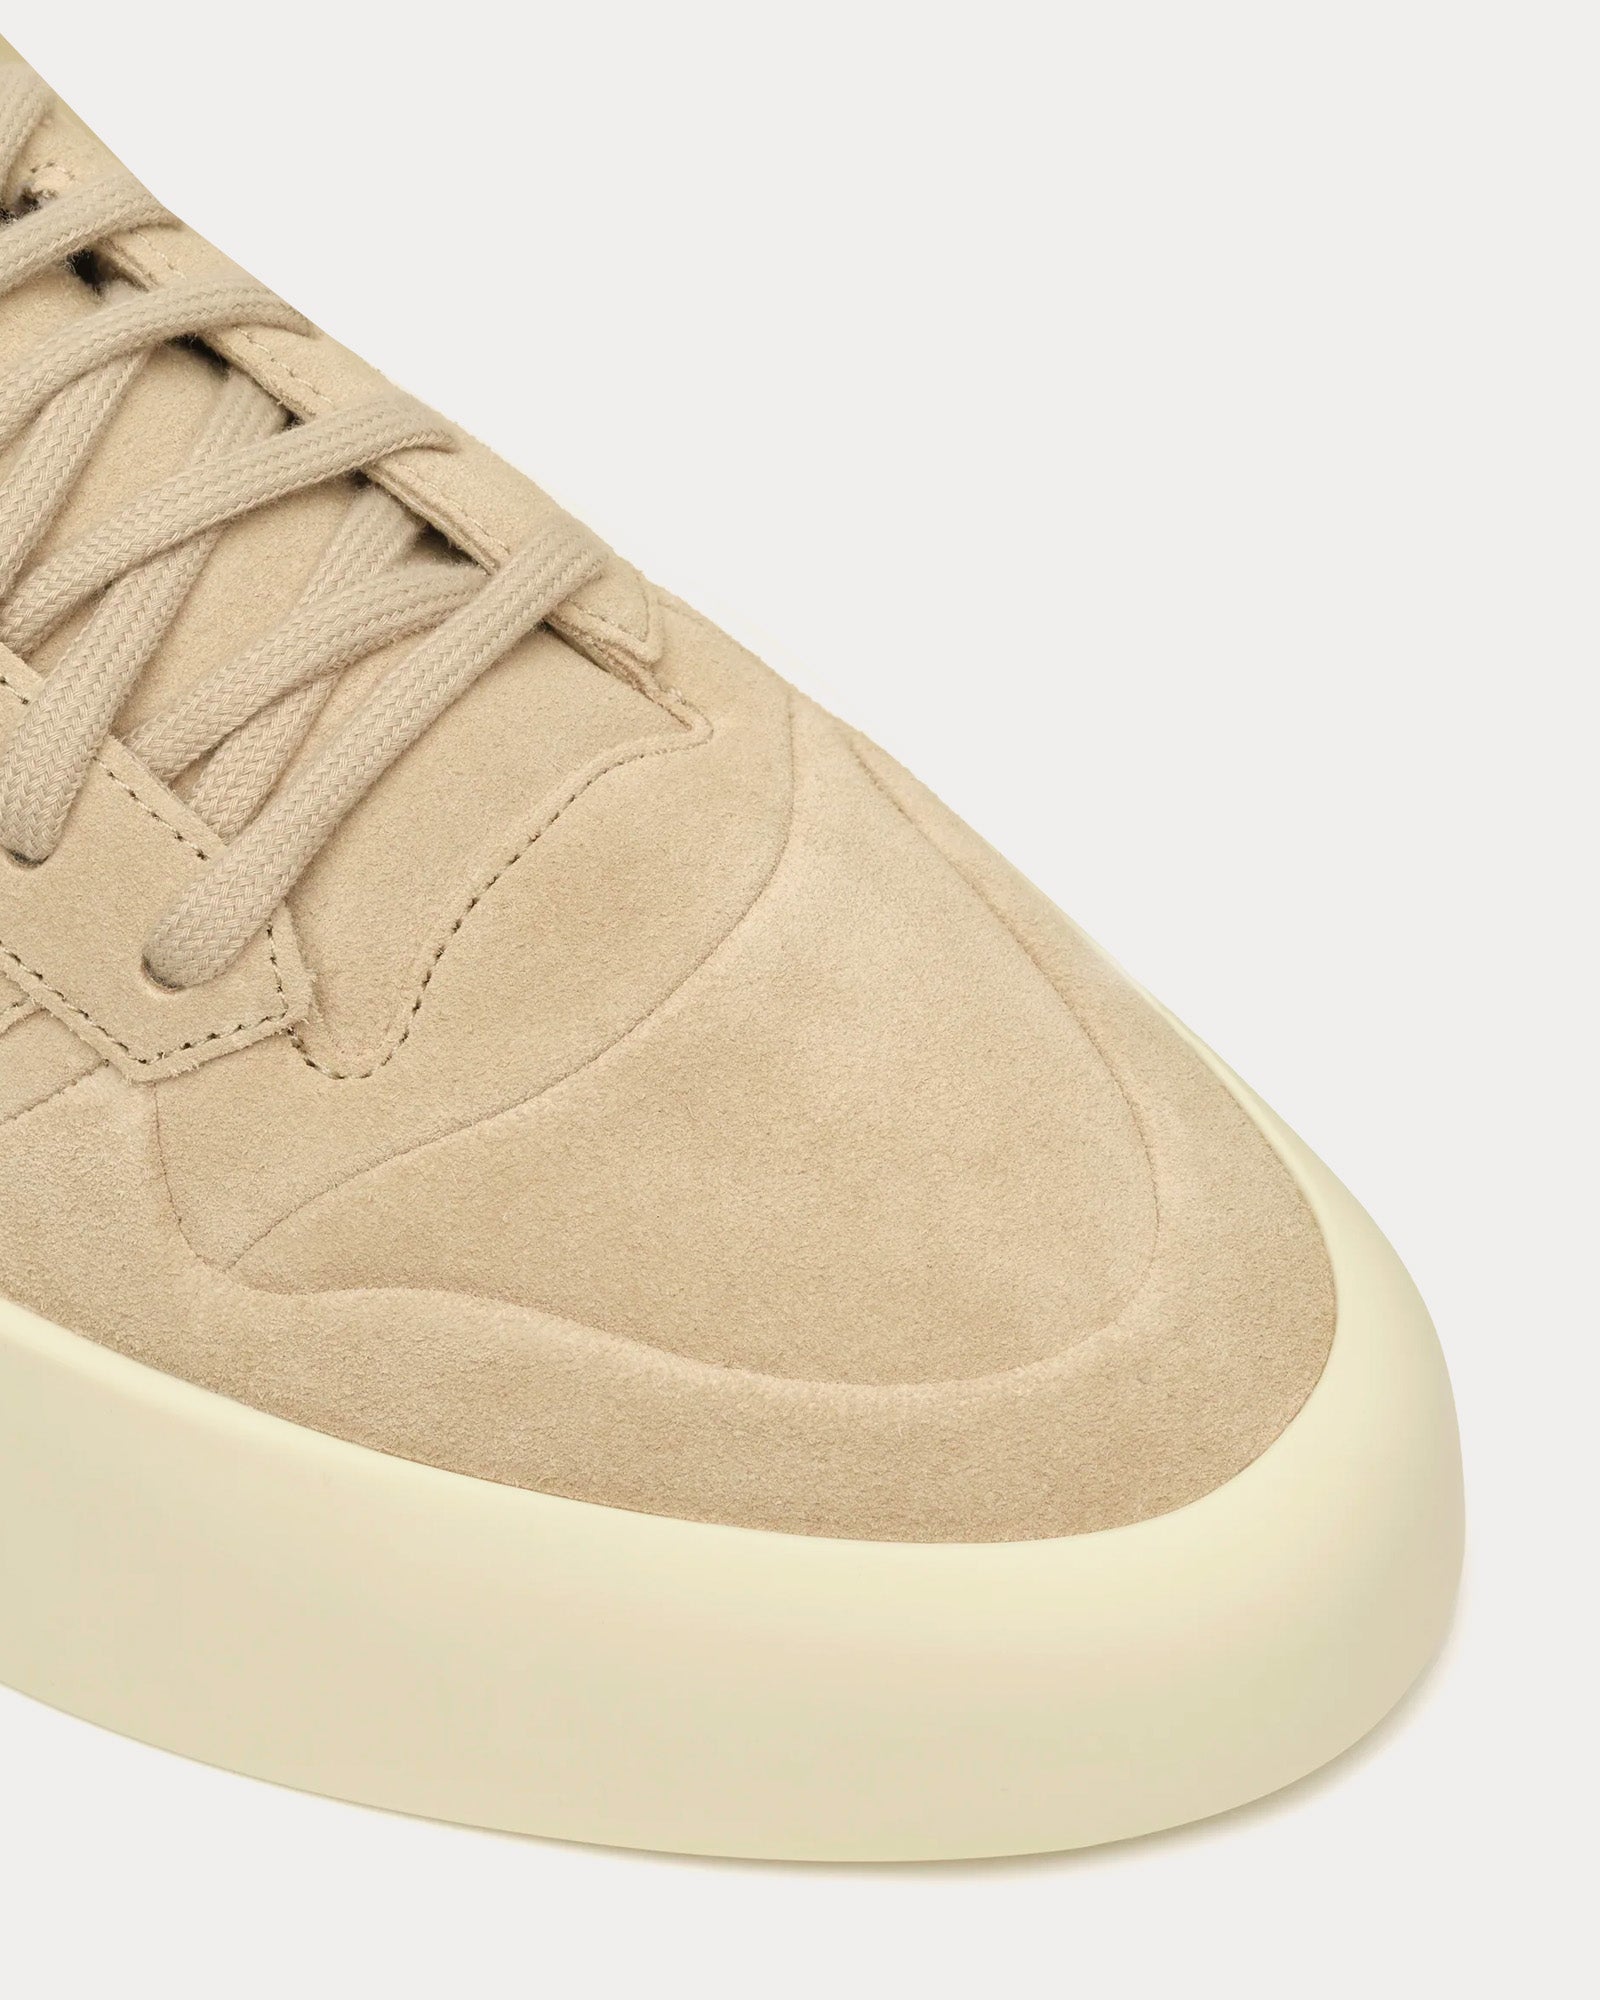 Fear of God Athletics - '86 Lo Clay / Clay Low Top Sneakers